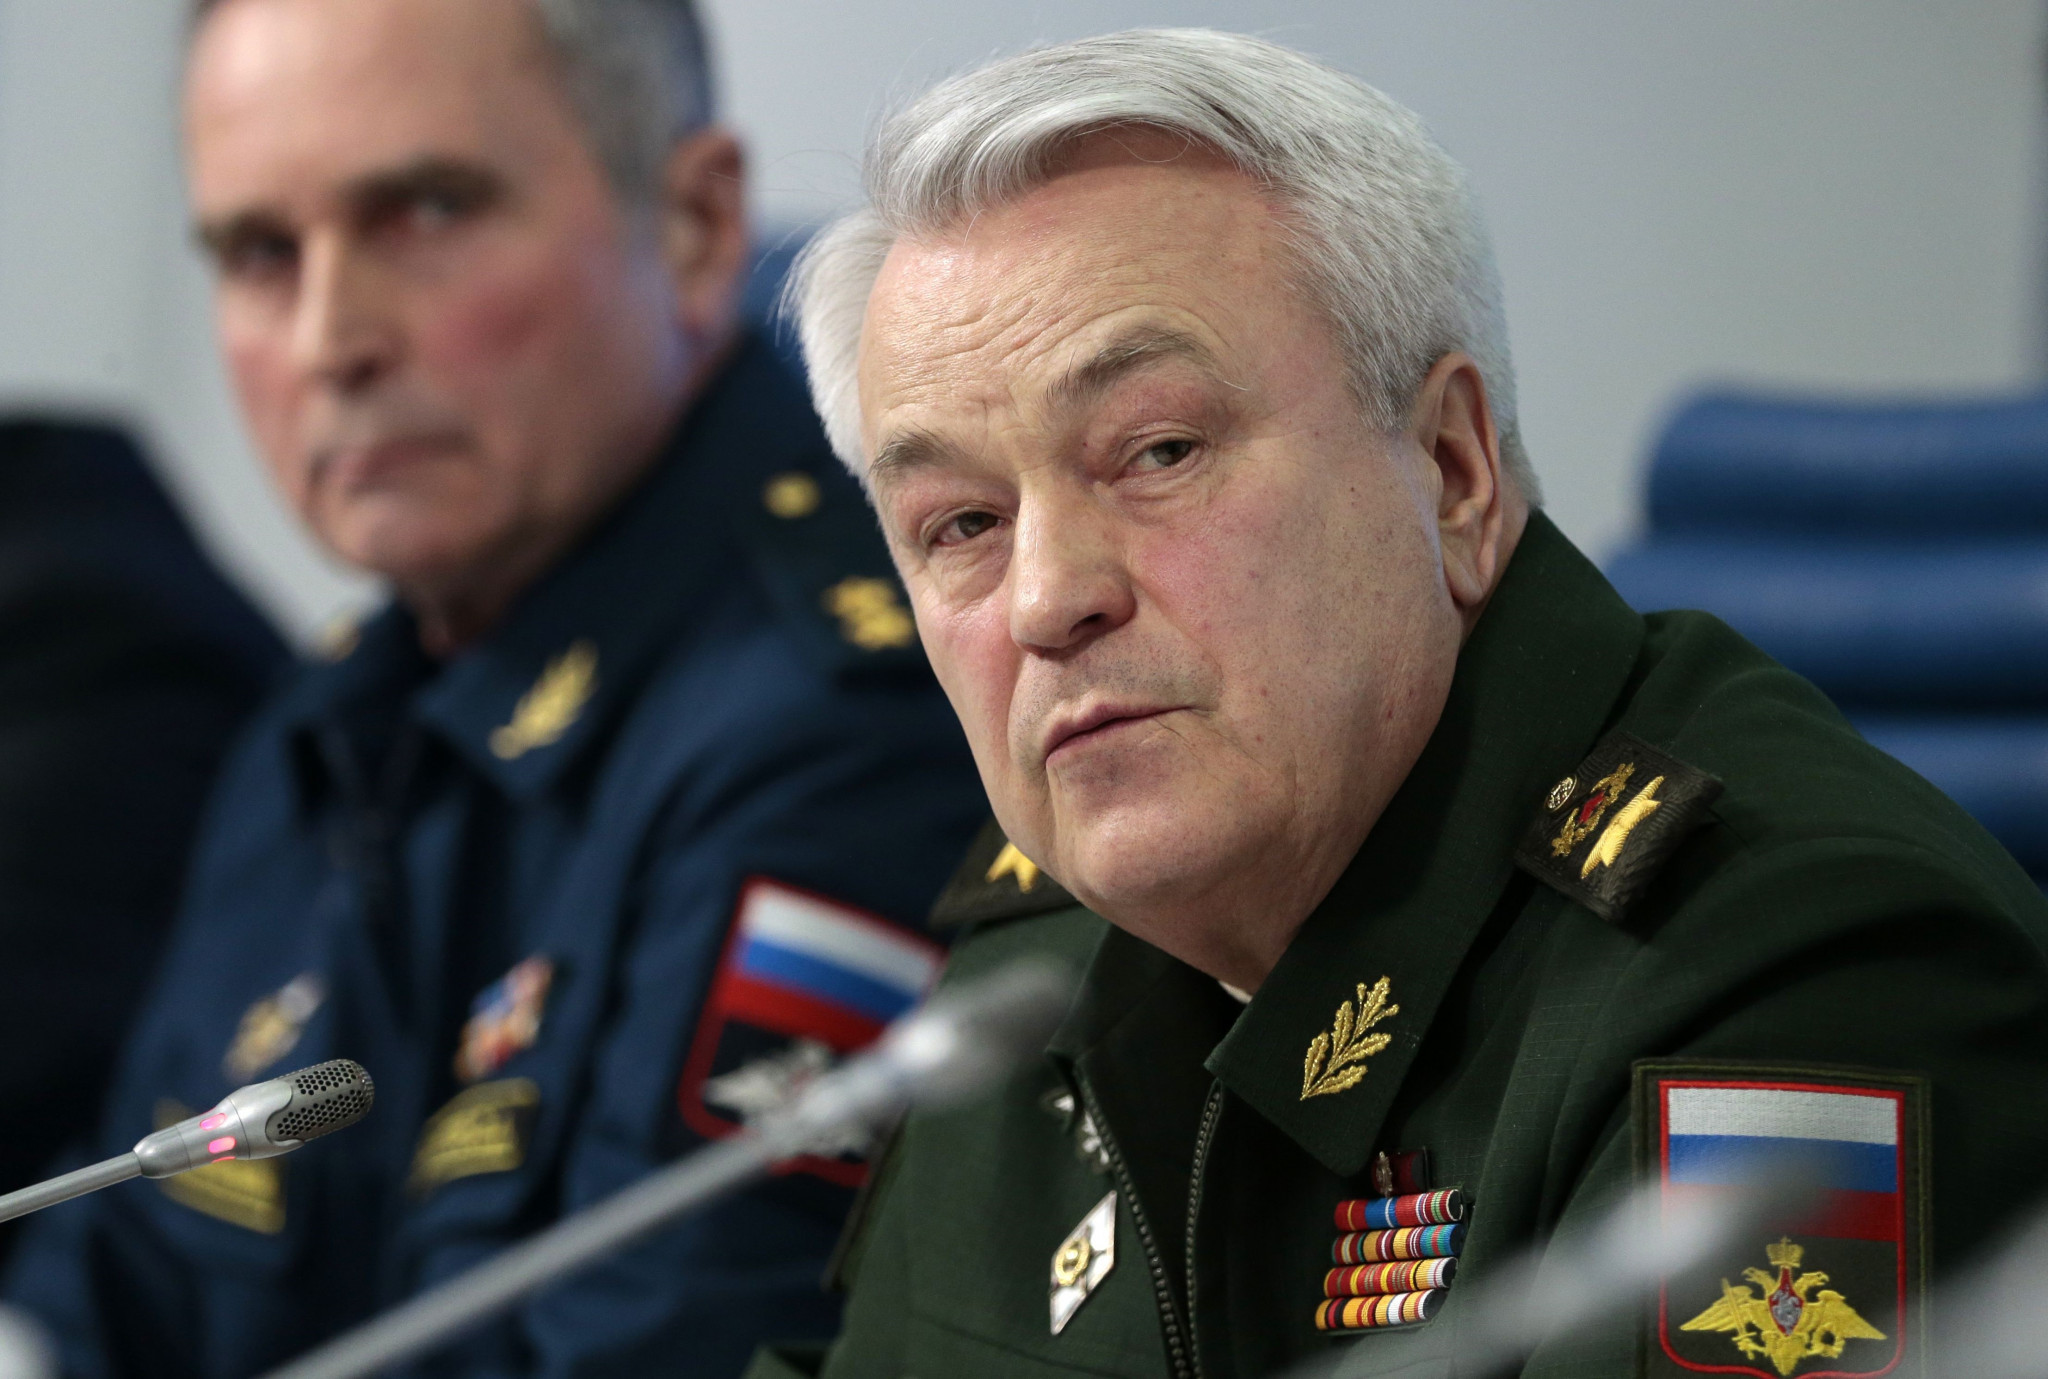 Russia's Deputy Defence Minister Nikolai Pankov spoke at the CISM General Assembly and Congress in Moscow ©Getty Images